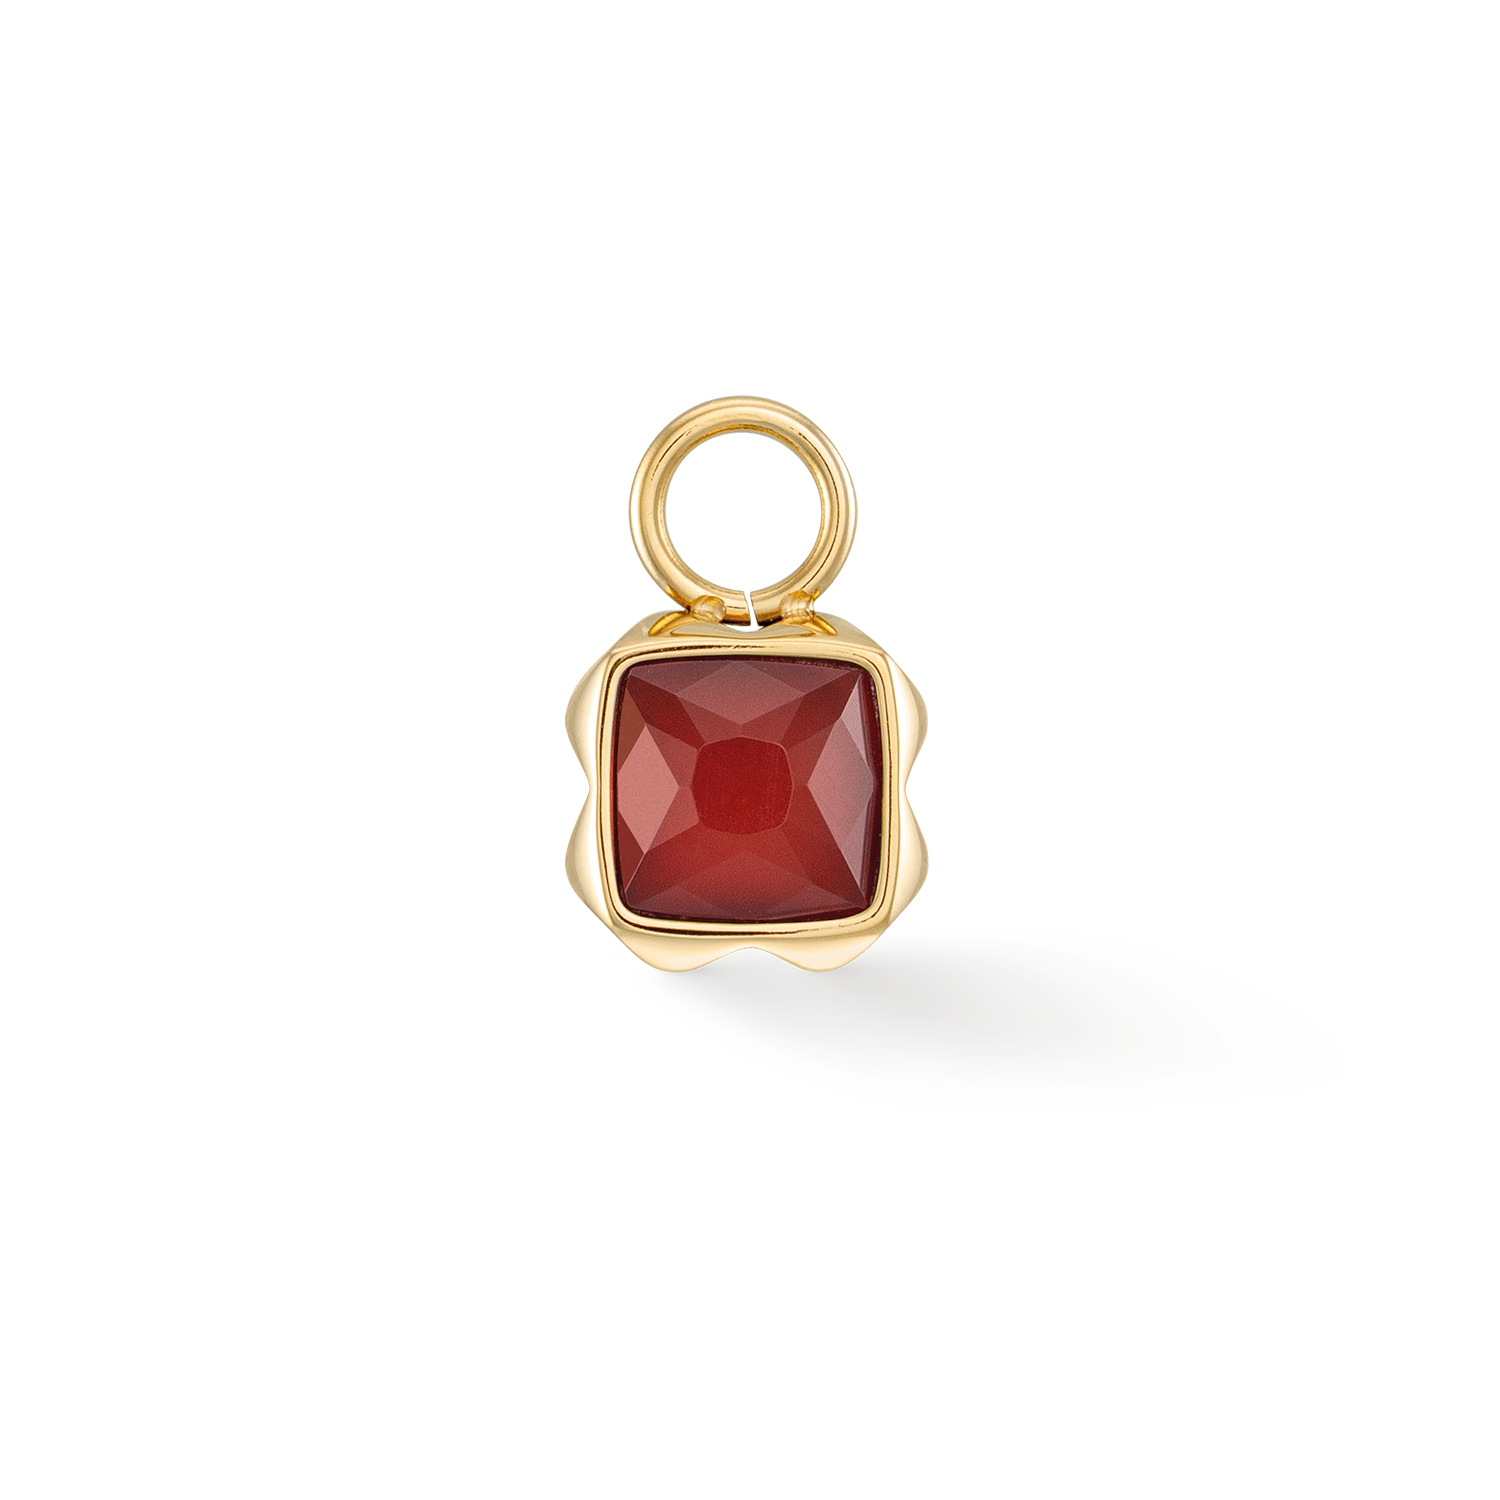 Birthstone January Charm Red Agate Gold